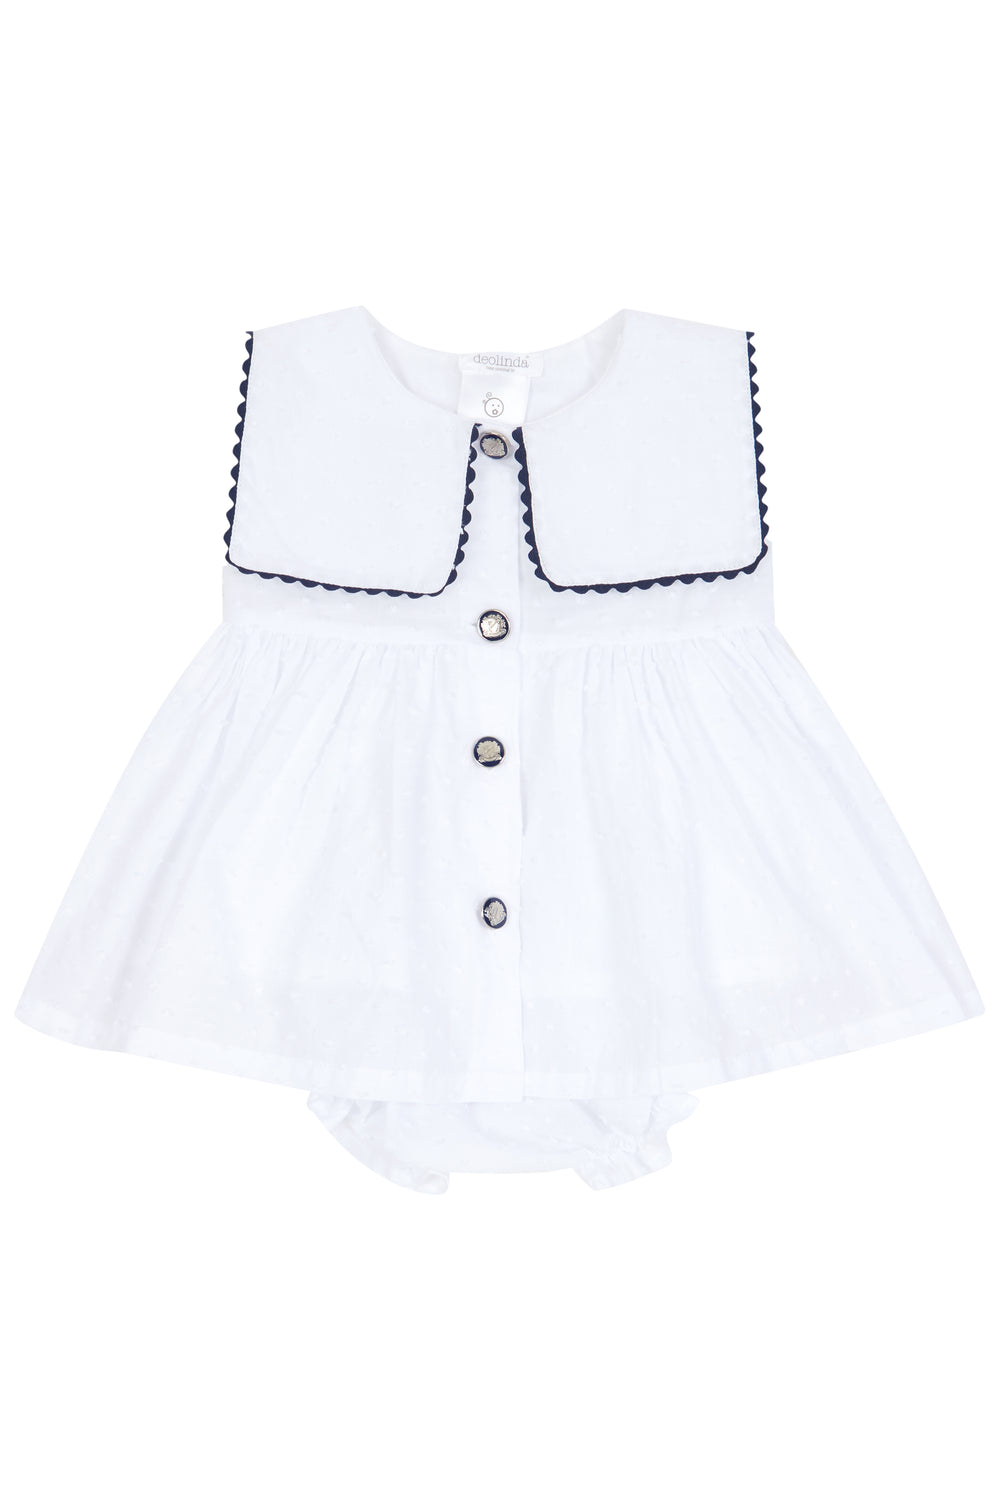 Chic by Deolinda PREORDER "Arielle" White Plumeti Dot Nautical Dress & Bloomers | Millie and John